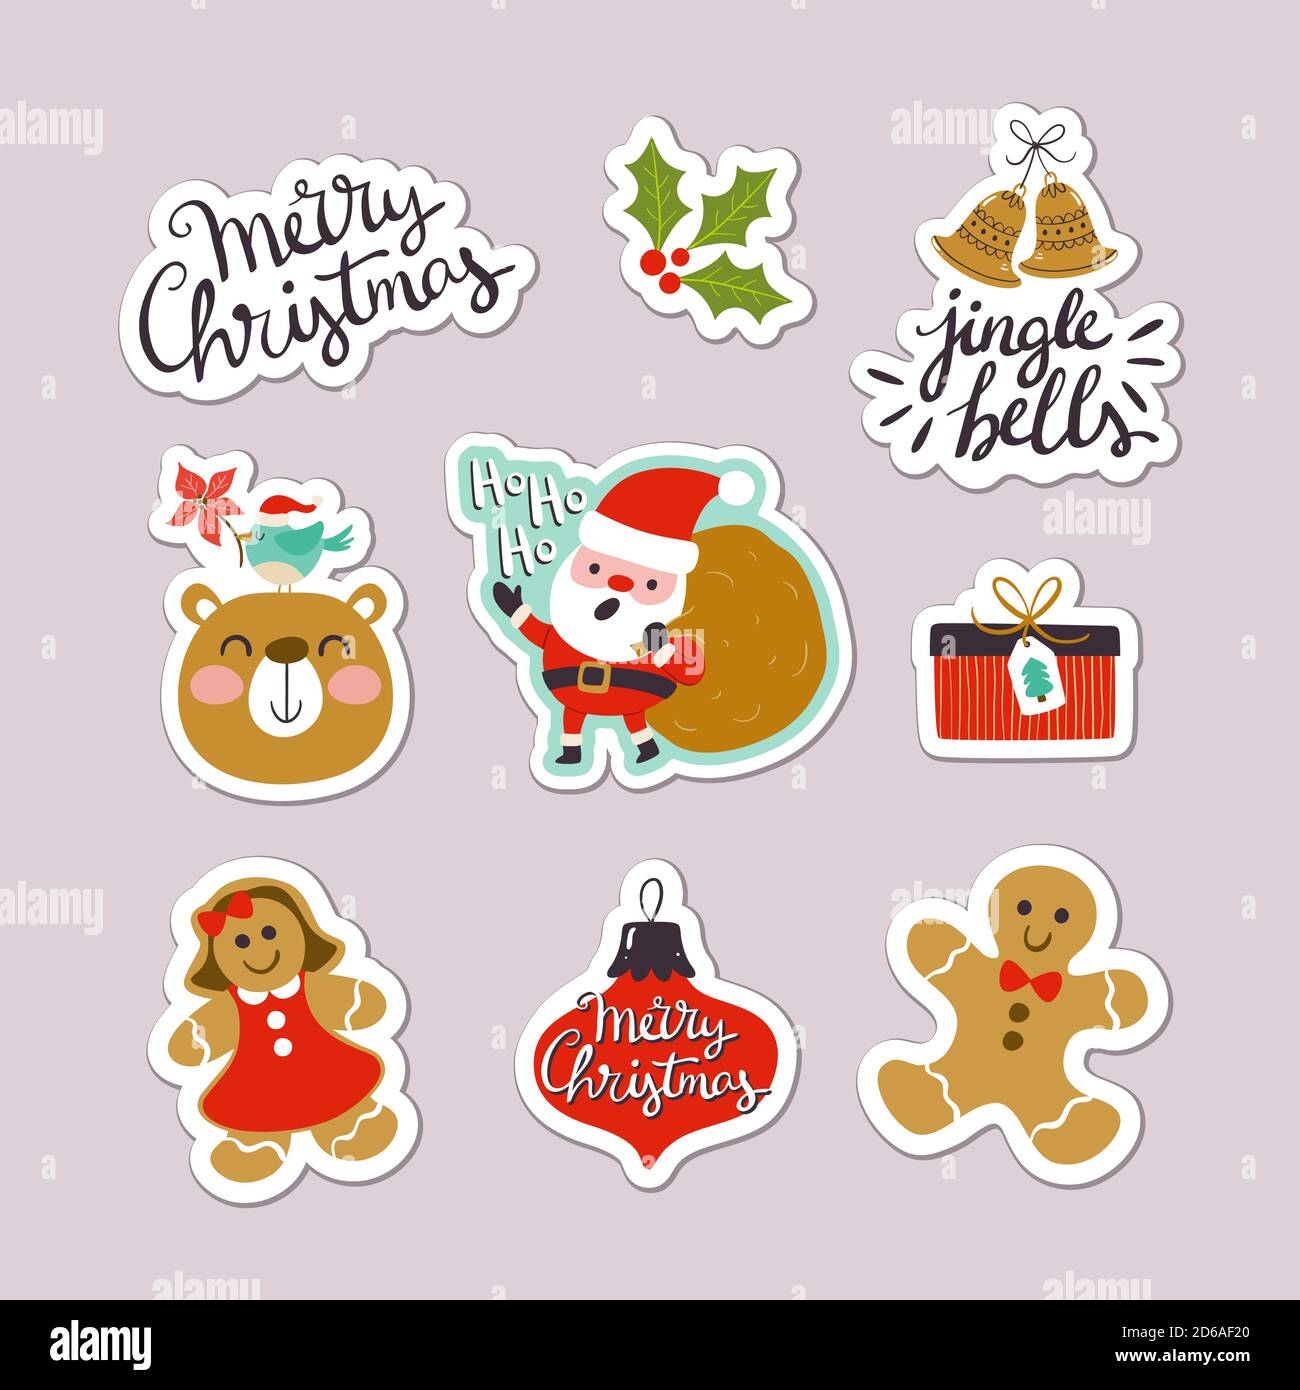 Collection of Christmas stickers with cute letterings, character designs and elements. Eps10 vector illustration. Stock Vector